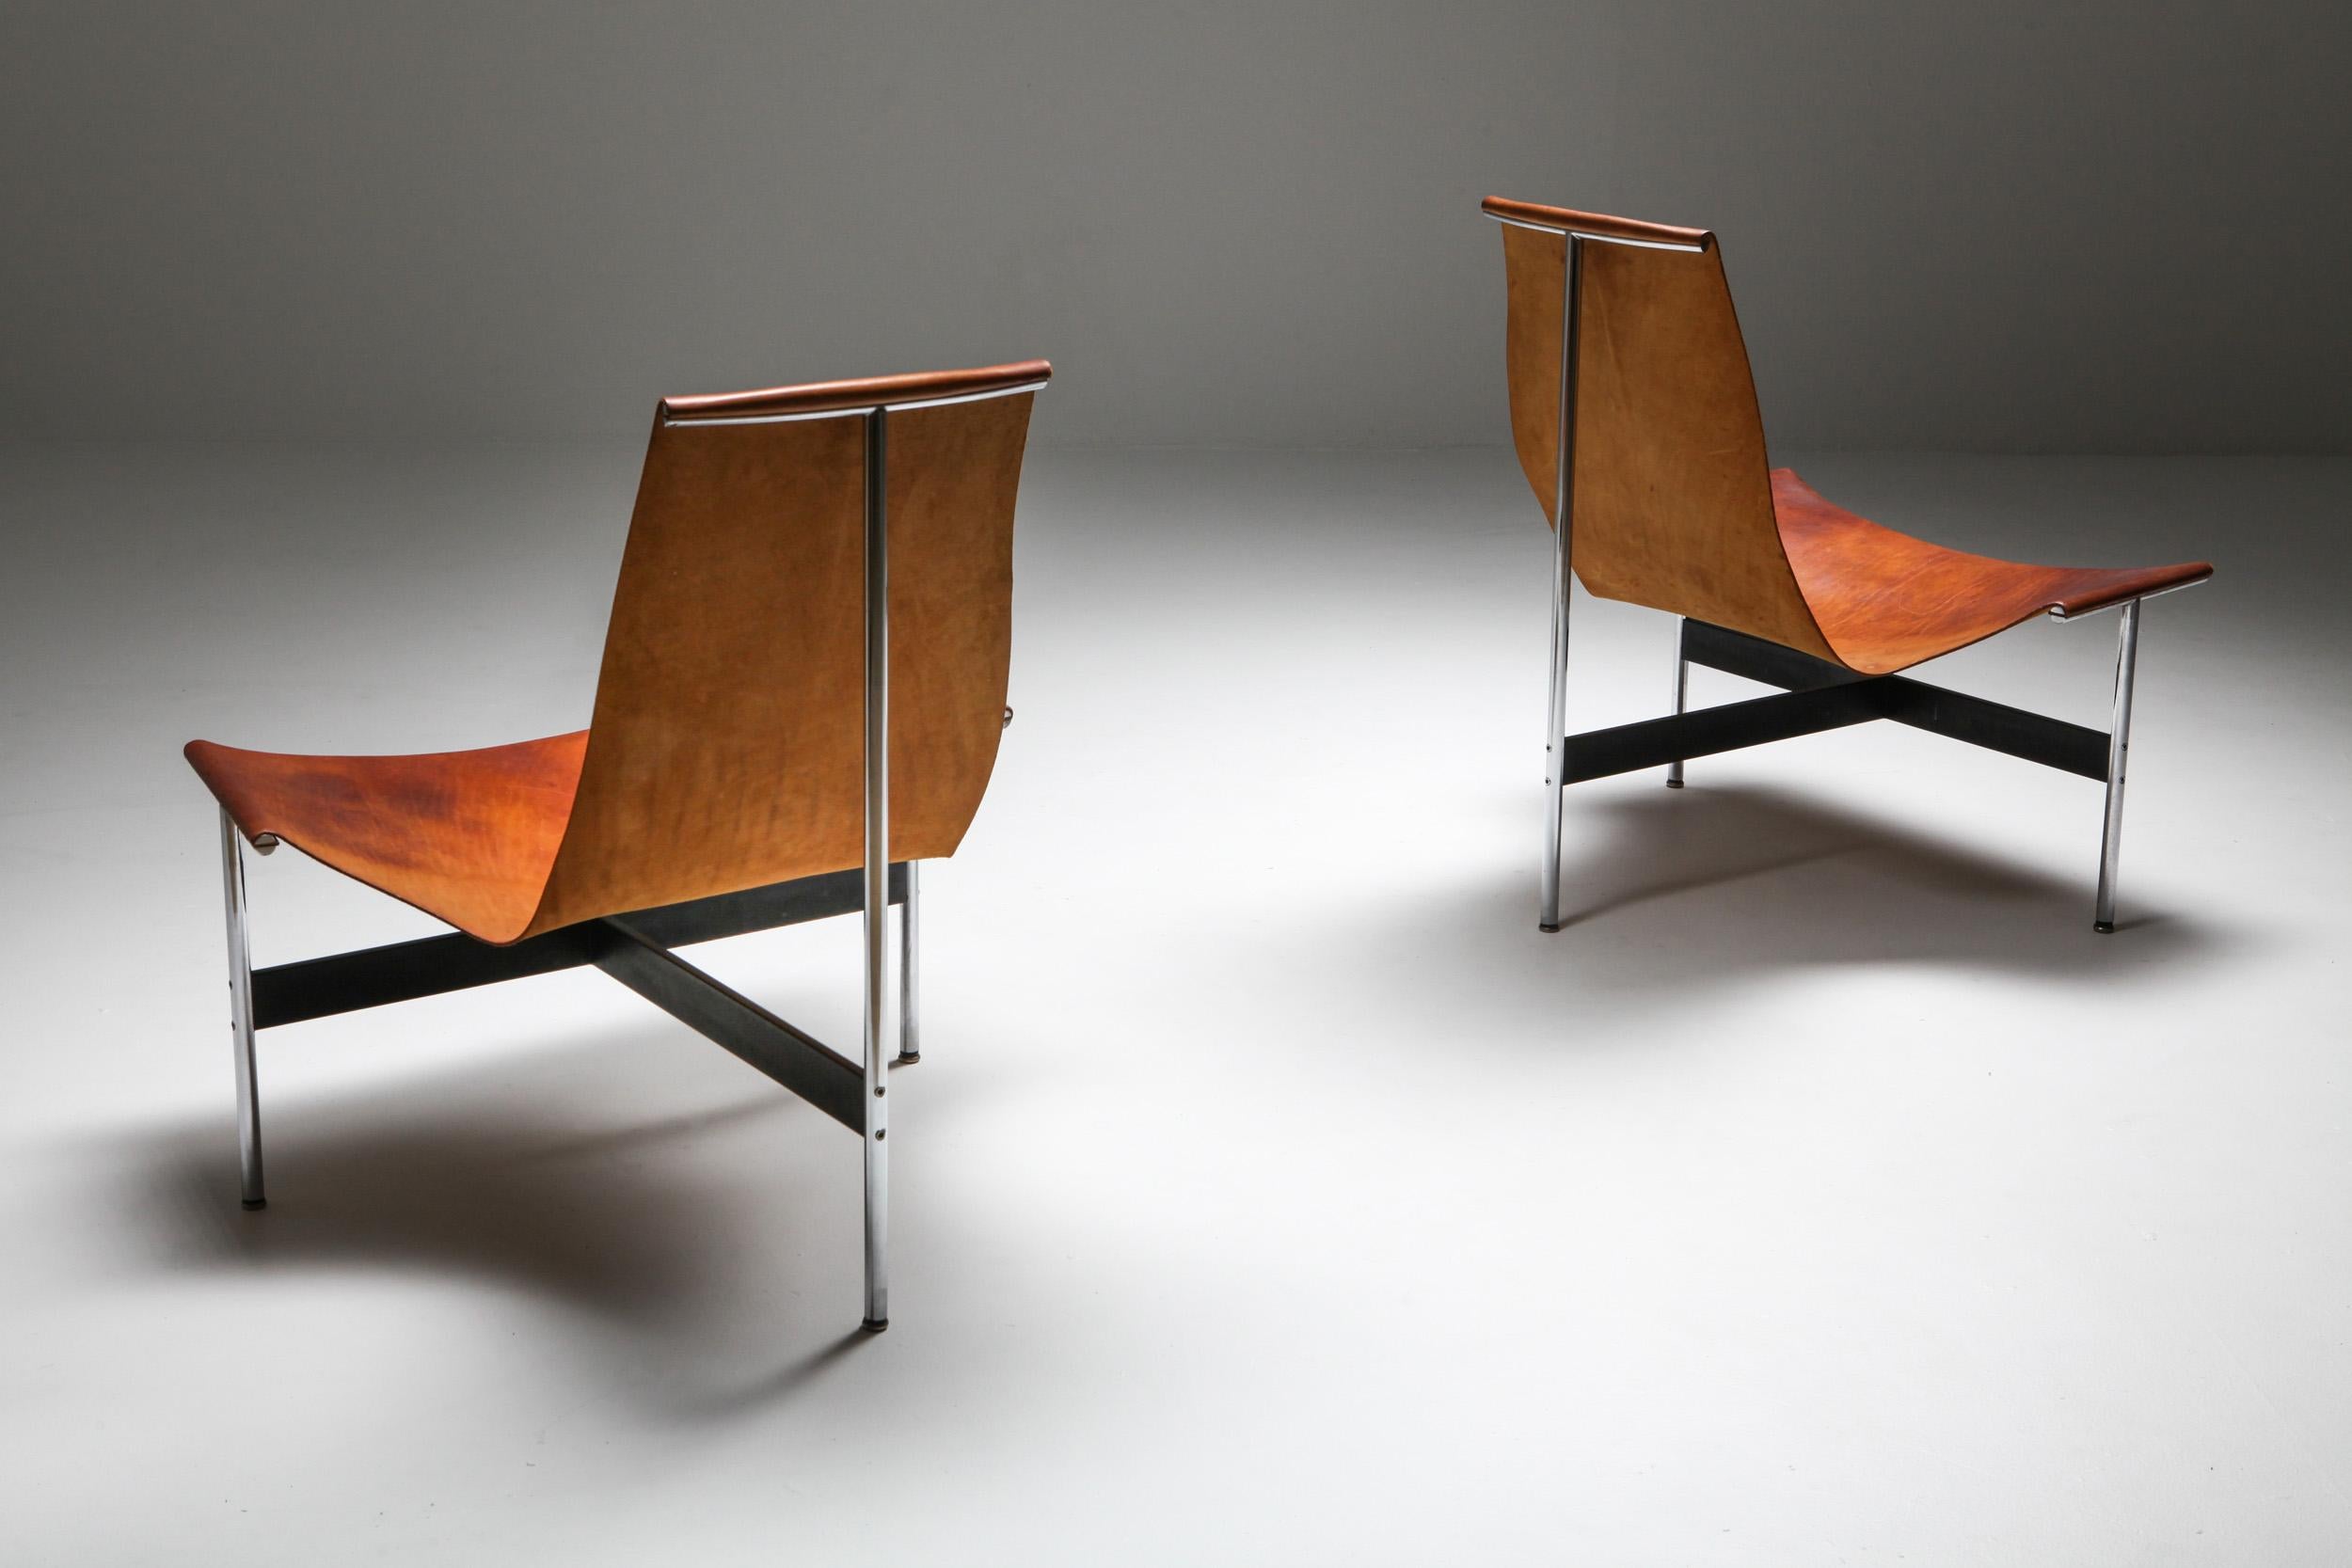 North American William Katavolos for Laverne International 'TH-15' Lounge Chair